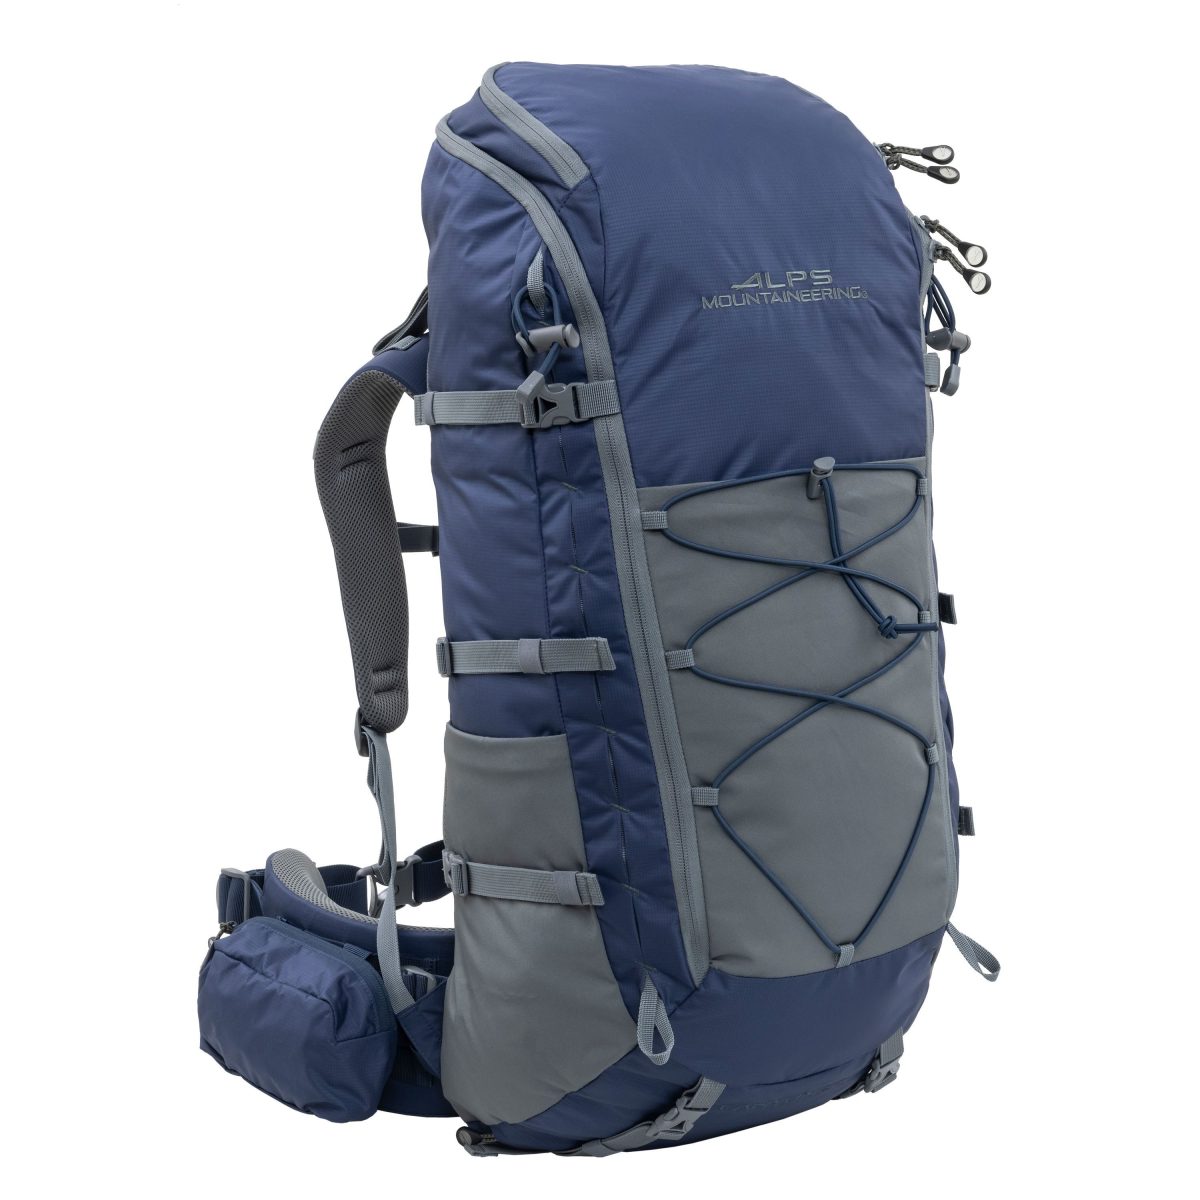 Alps Mountaineering Canyon 55 Backpack - Gray/Navy